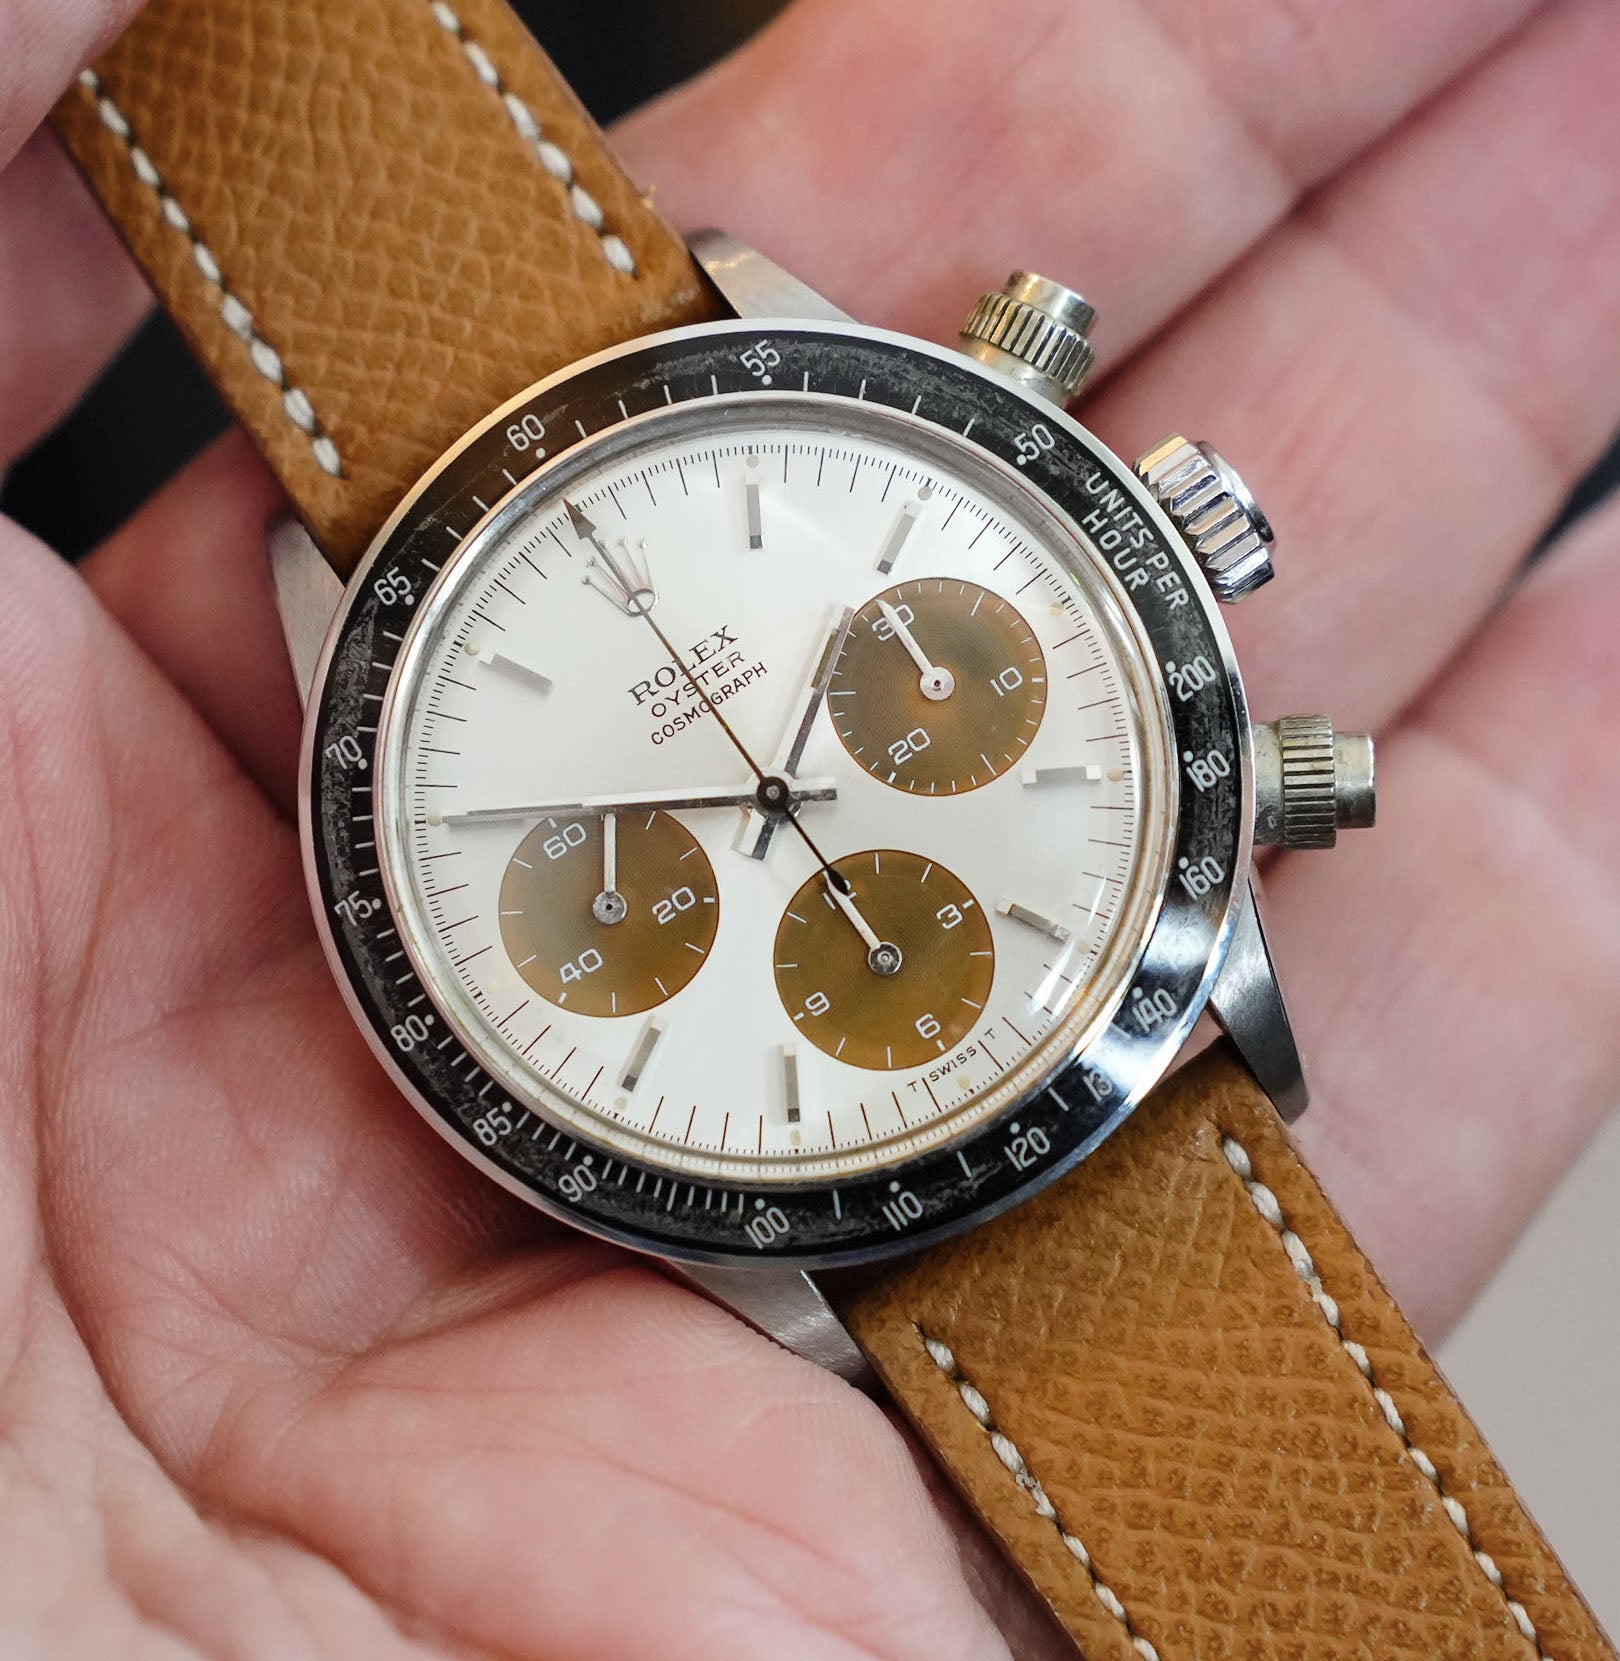 Rolex 6263 Tropical Dial Daytona with Mk1 pushers at Rolliefest 2023